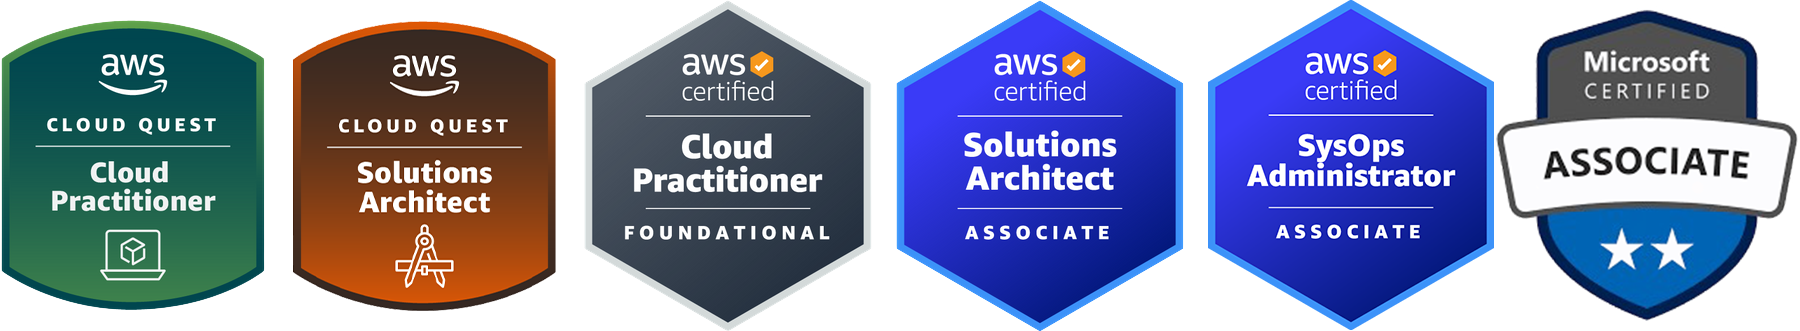 Amazon Web Services Training and Certification